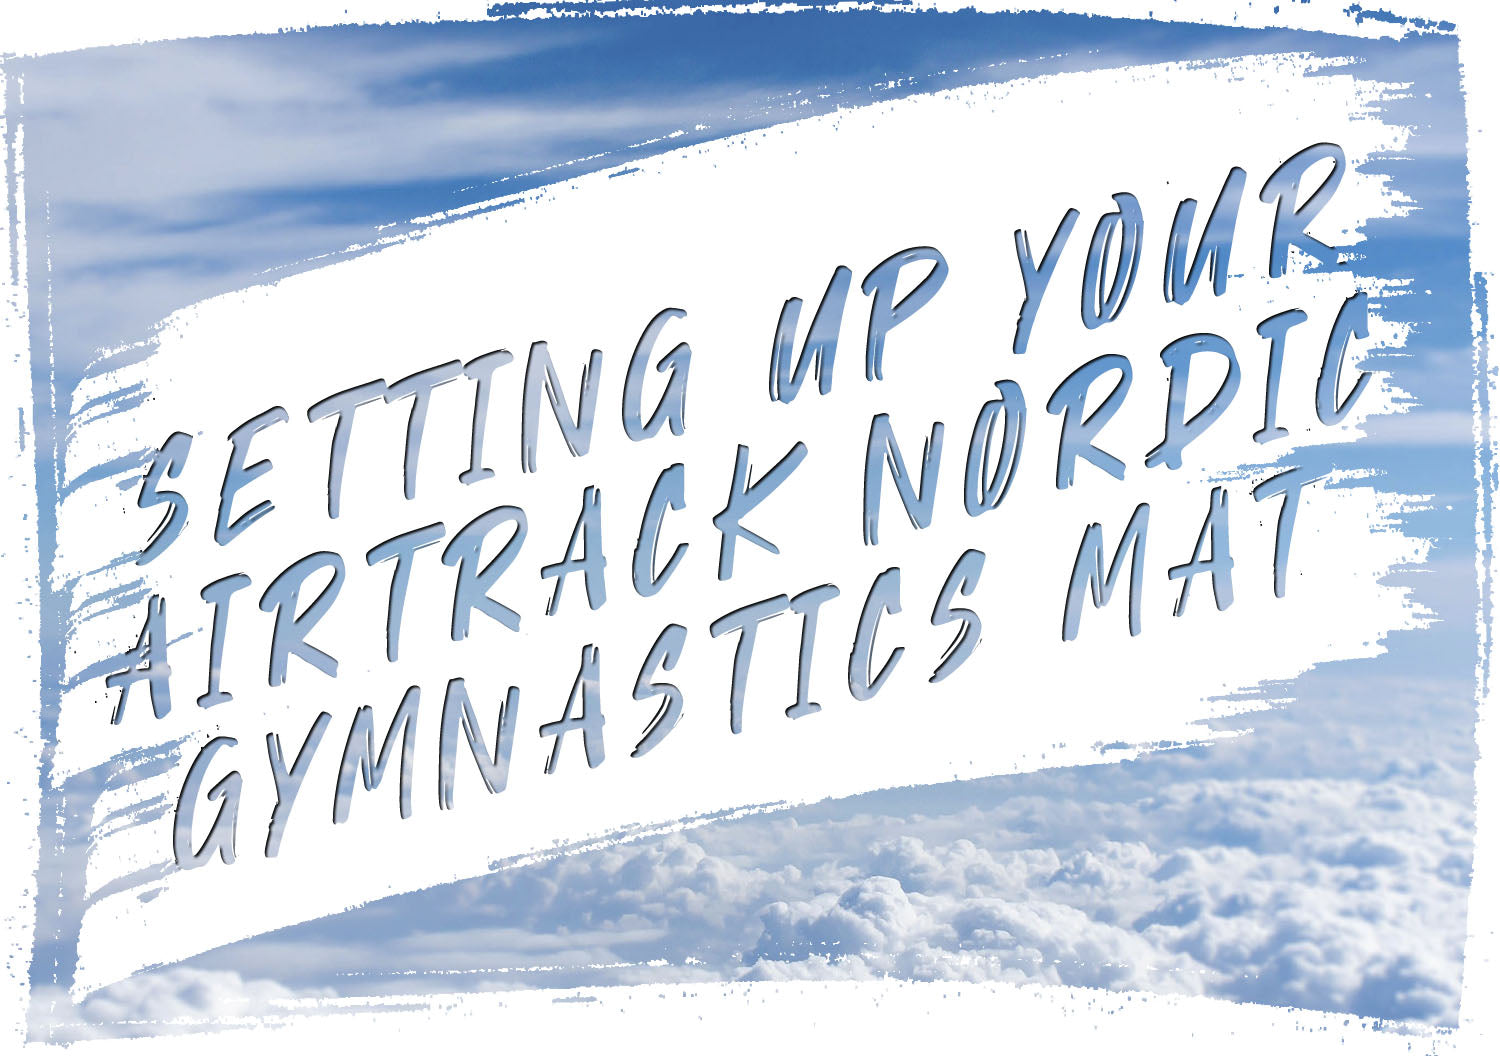 Setting up your AirTrack Nordic gymnastics mat